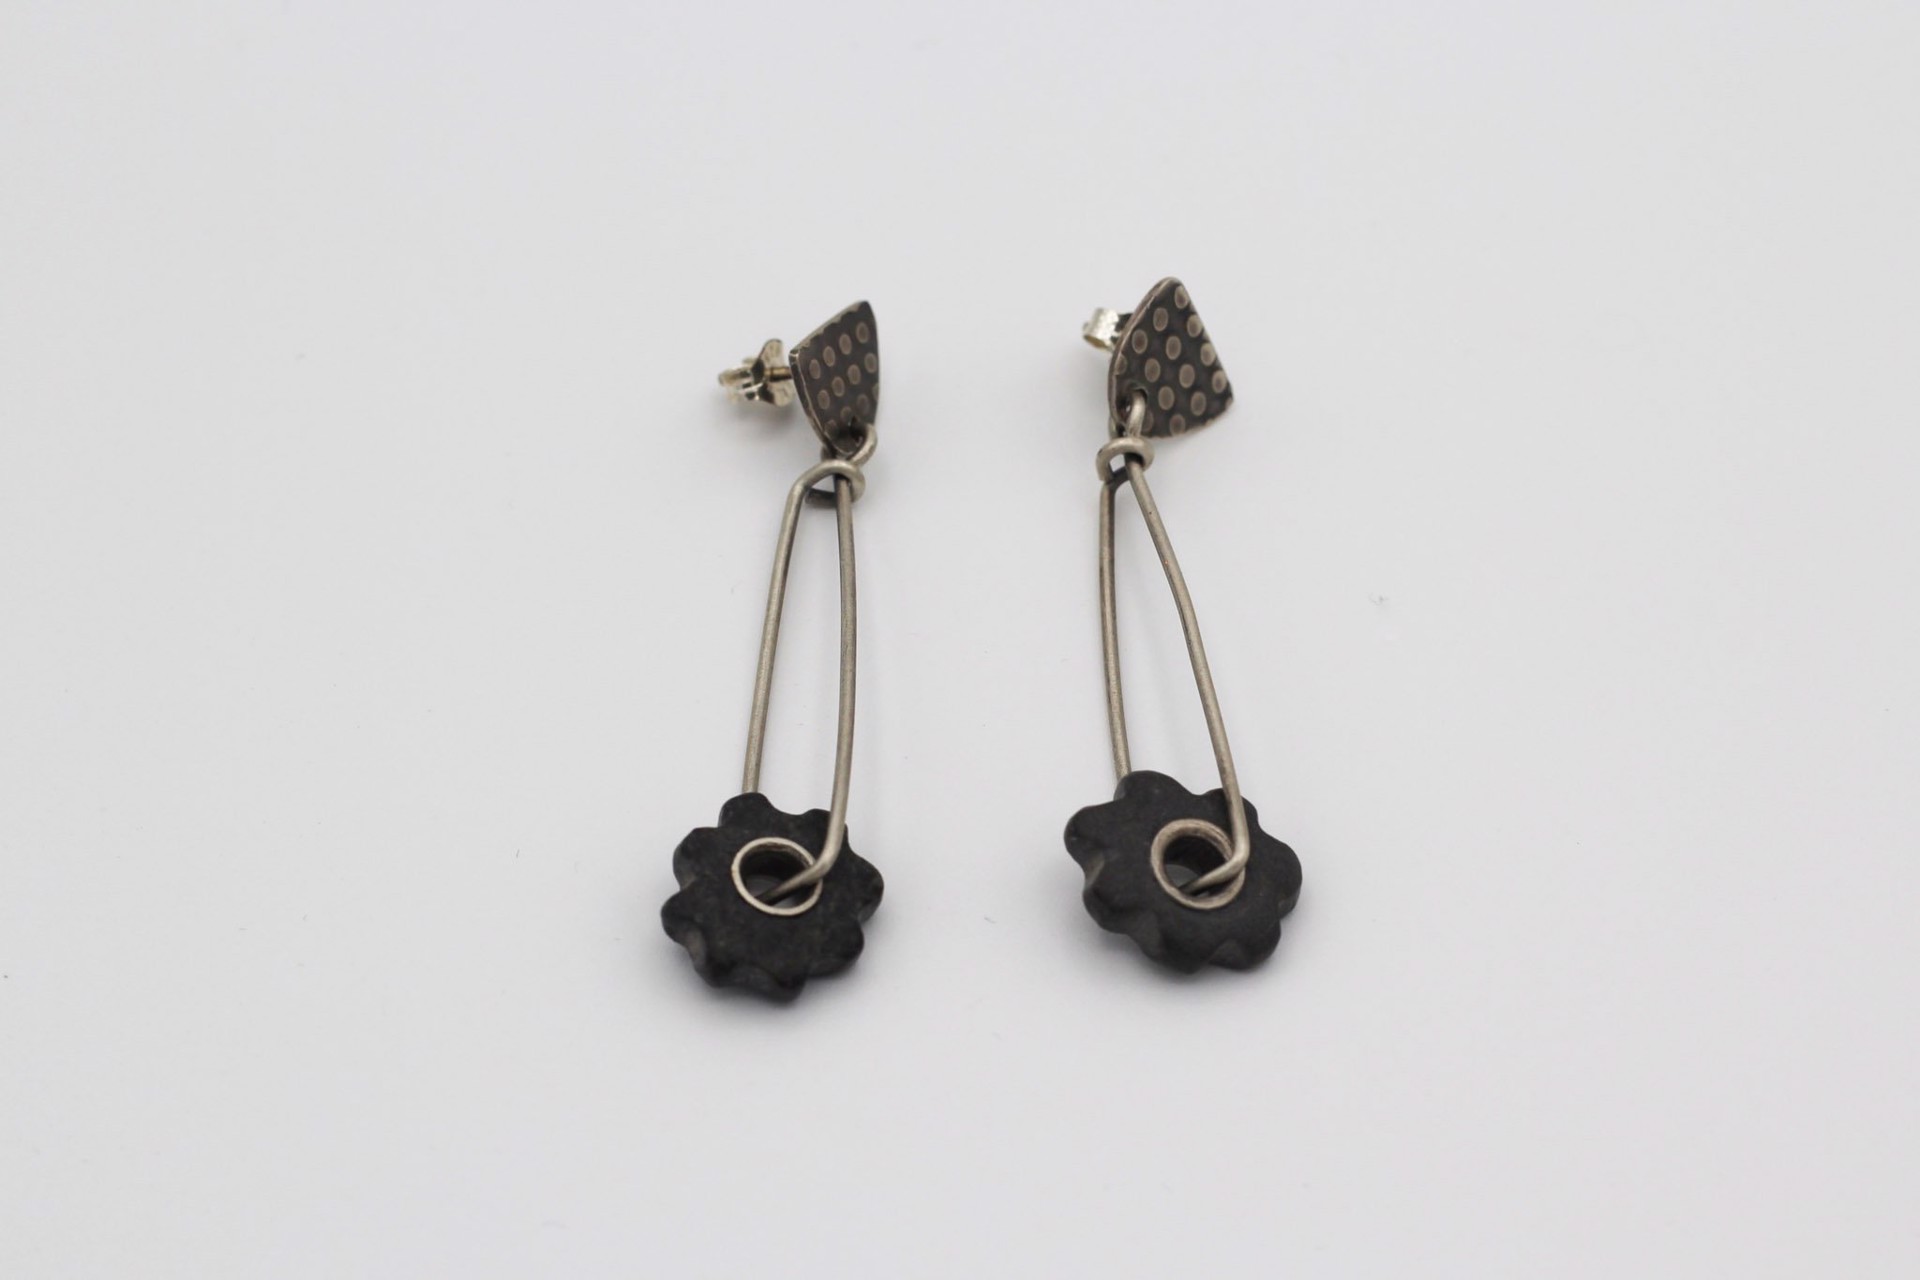 Earrings by Susan Richter-O'Connell